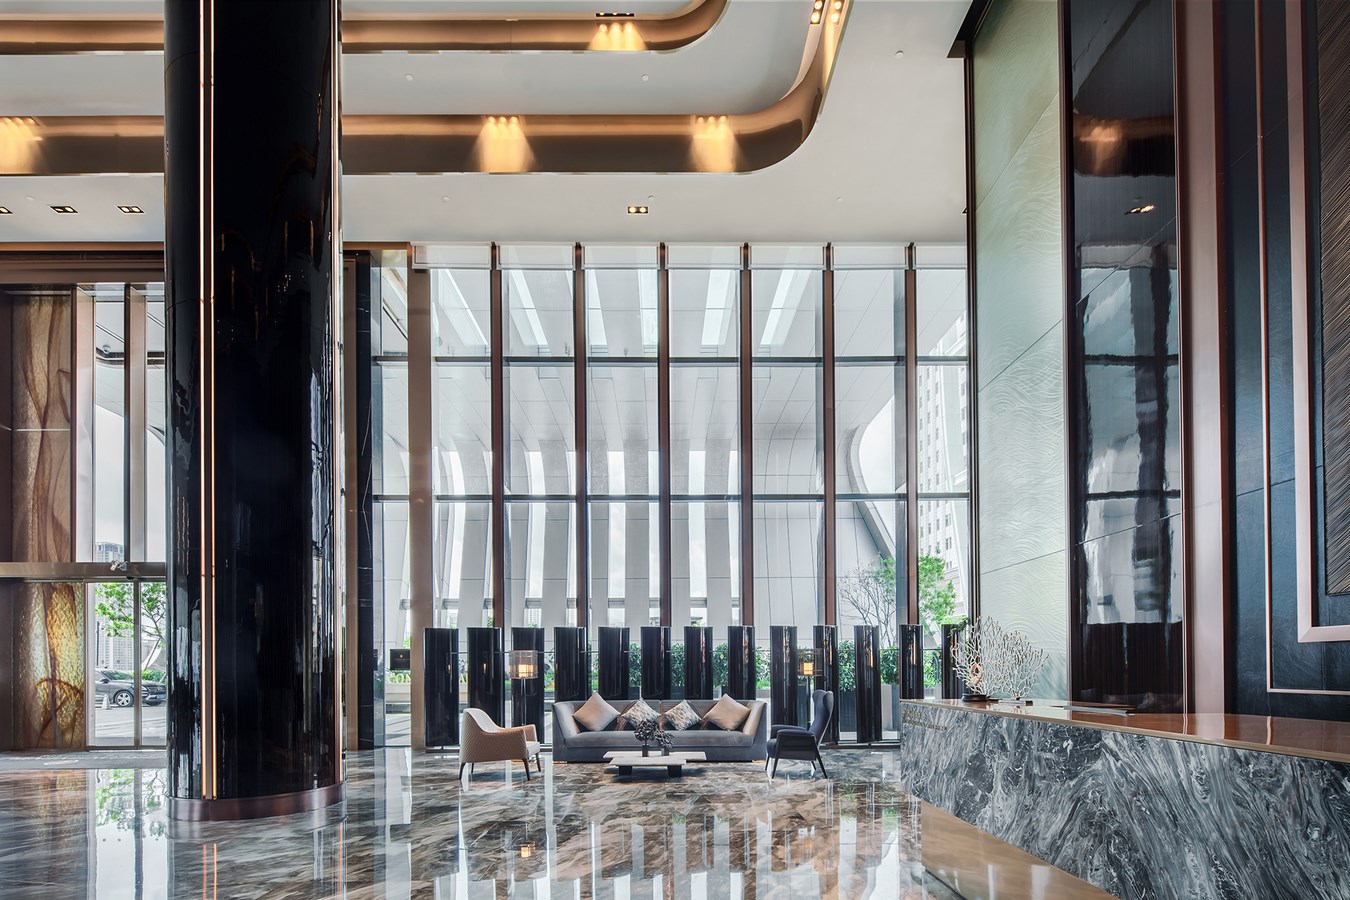 Intercontinental Hotel Zhuhai By CL3 Architects Limited